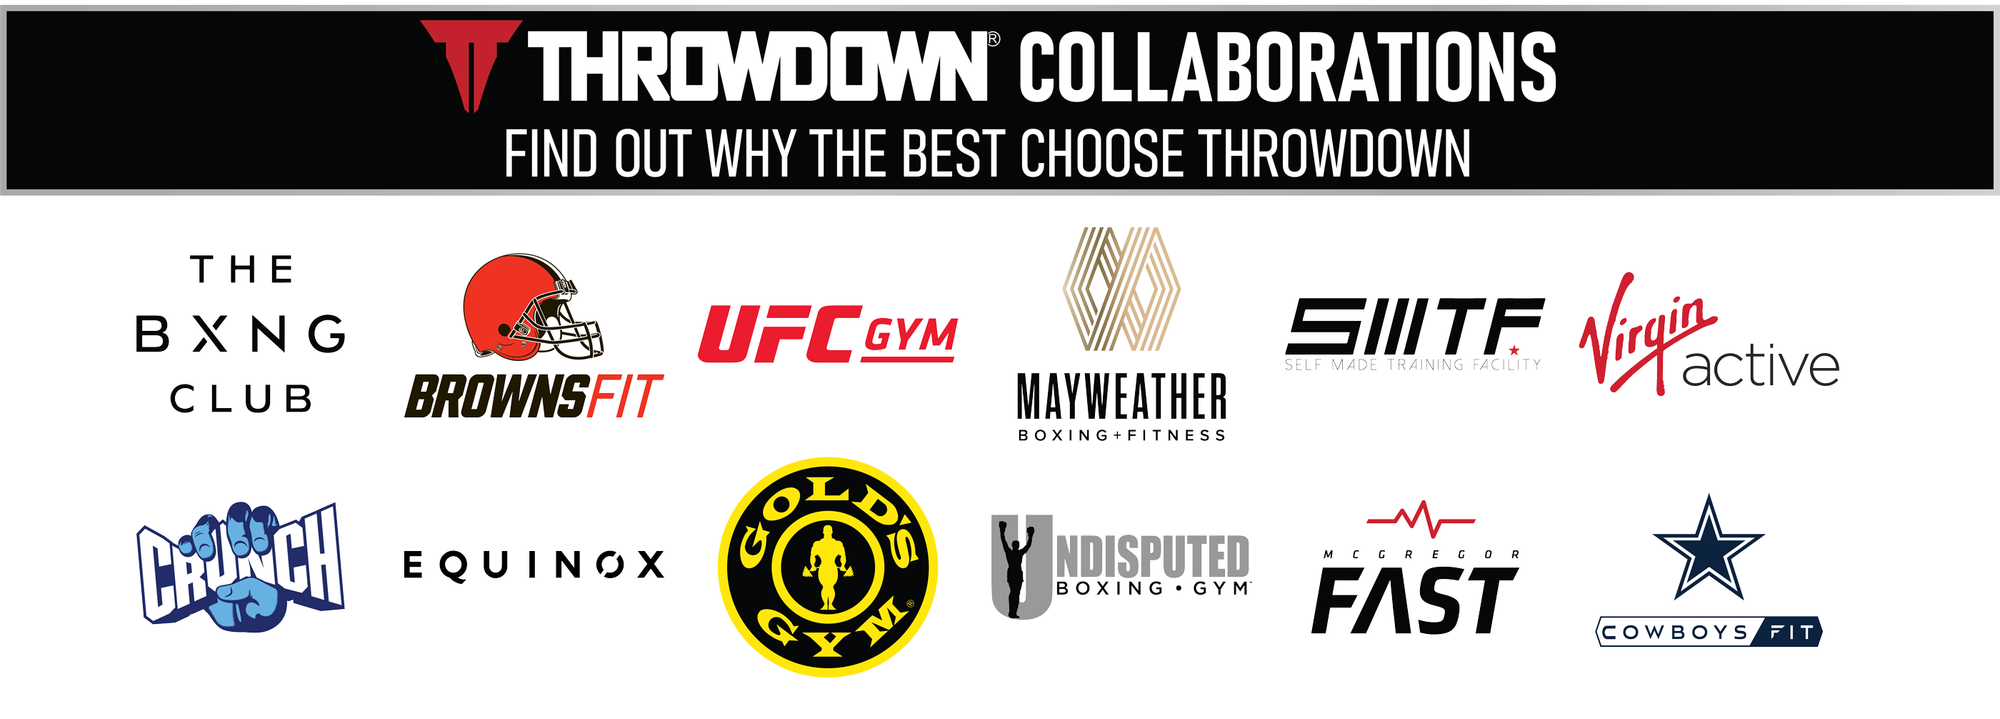 Throwdown Collaborations, Crunch Gyms, Mayweather, UFC, Golds Gym, 24 Hr Fitness, McGregor Fast, Virgin Active, Texas Family Fitness, One Life Fitness